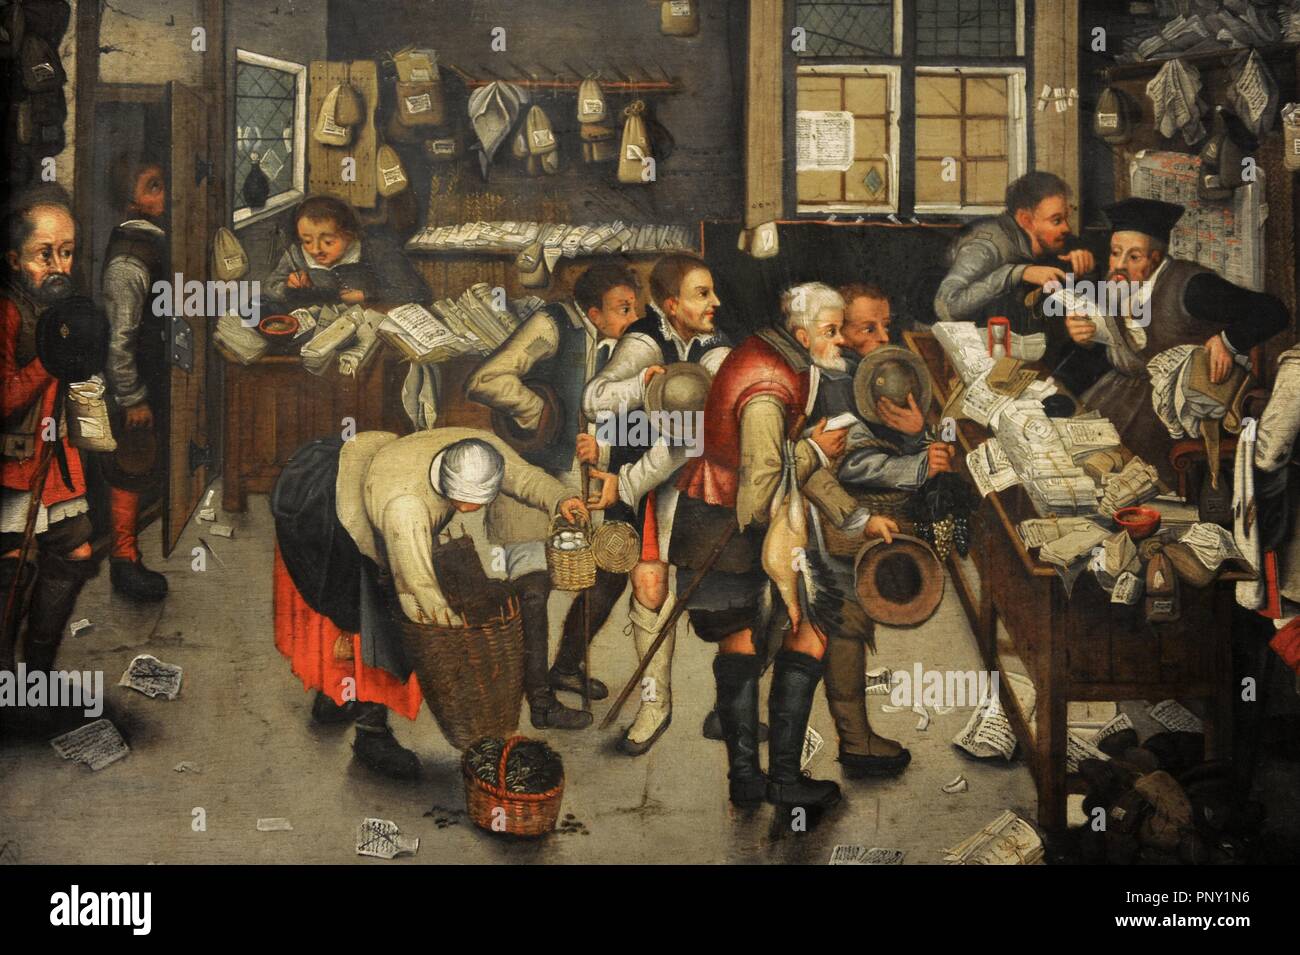 Pieter Brueghel the Younger (1564-1636). Flemish painter. The Collector's Office, after 1615. German Historical Museum. Berlin. Germany. Stock Photo